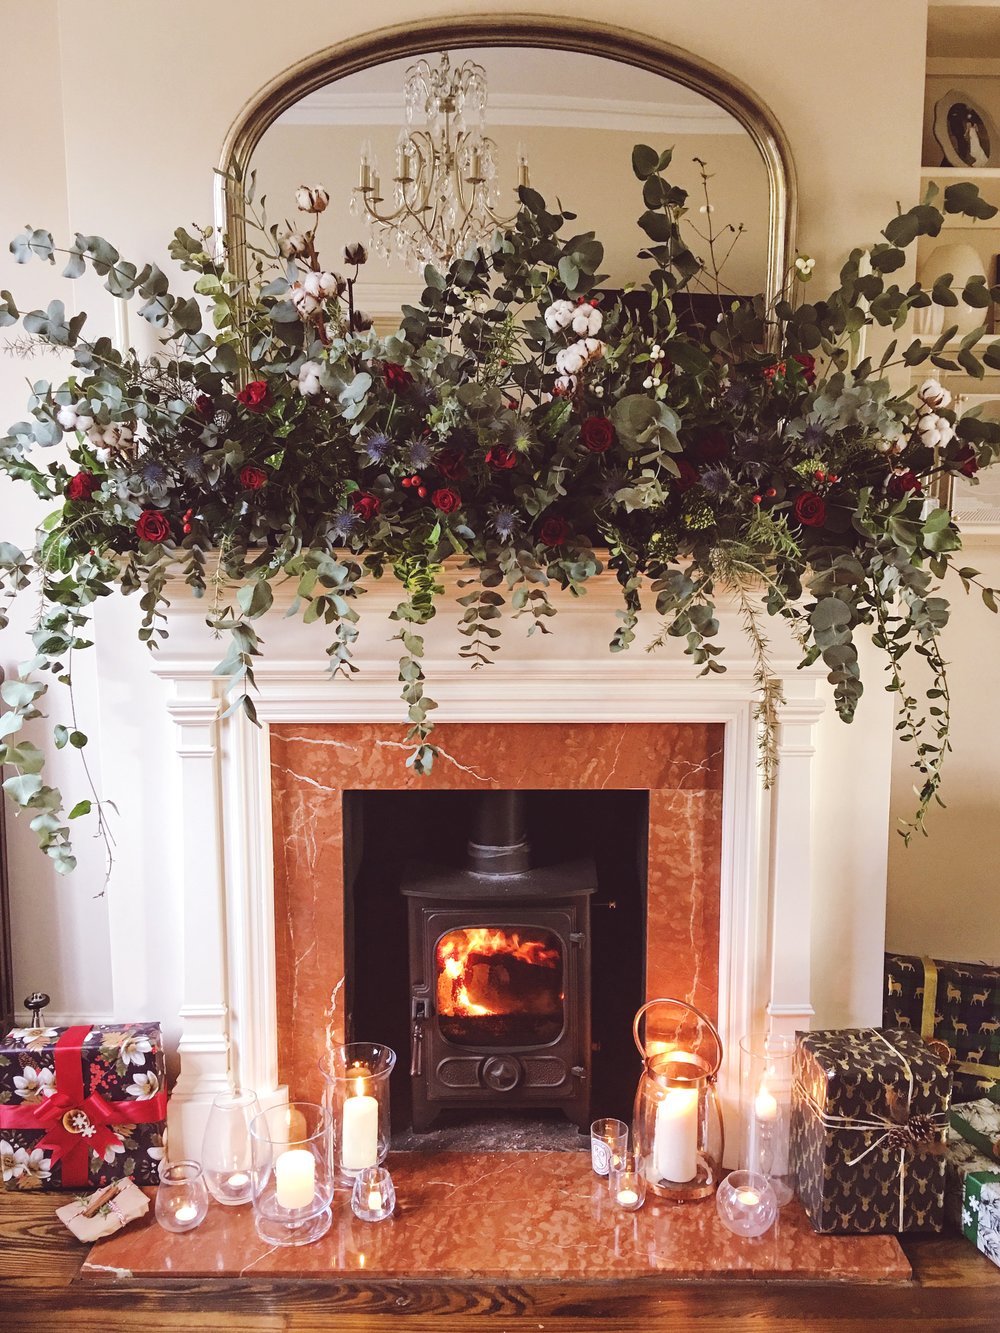 Large Wreaths for Above Fireplace Best Of My Home at Christmas How to Make This Fireplace Garland